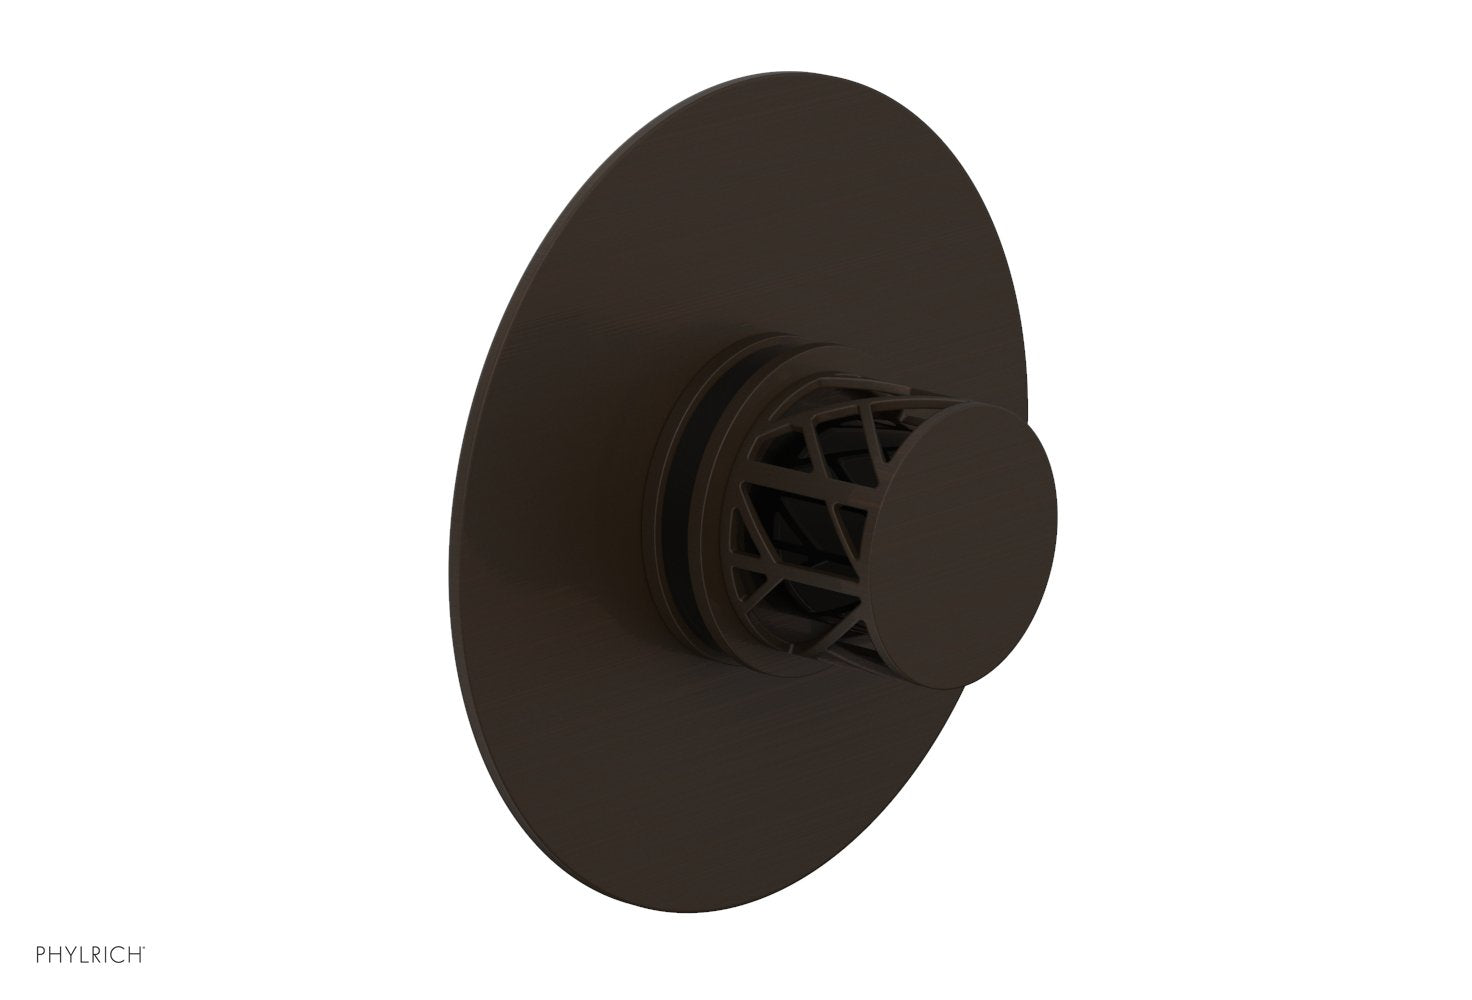 Phylrich JOLIE Pressure Balance Shower Plate & Handle Trim, Round Handle with "Black" Accents